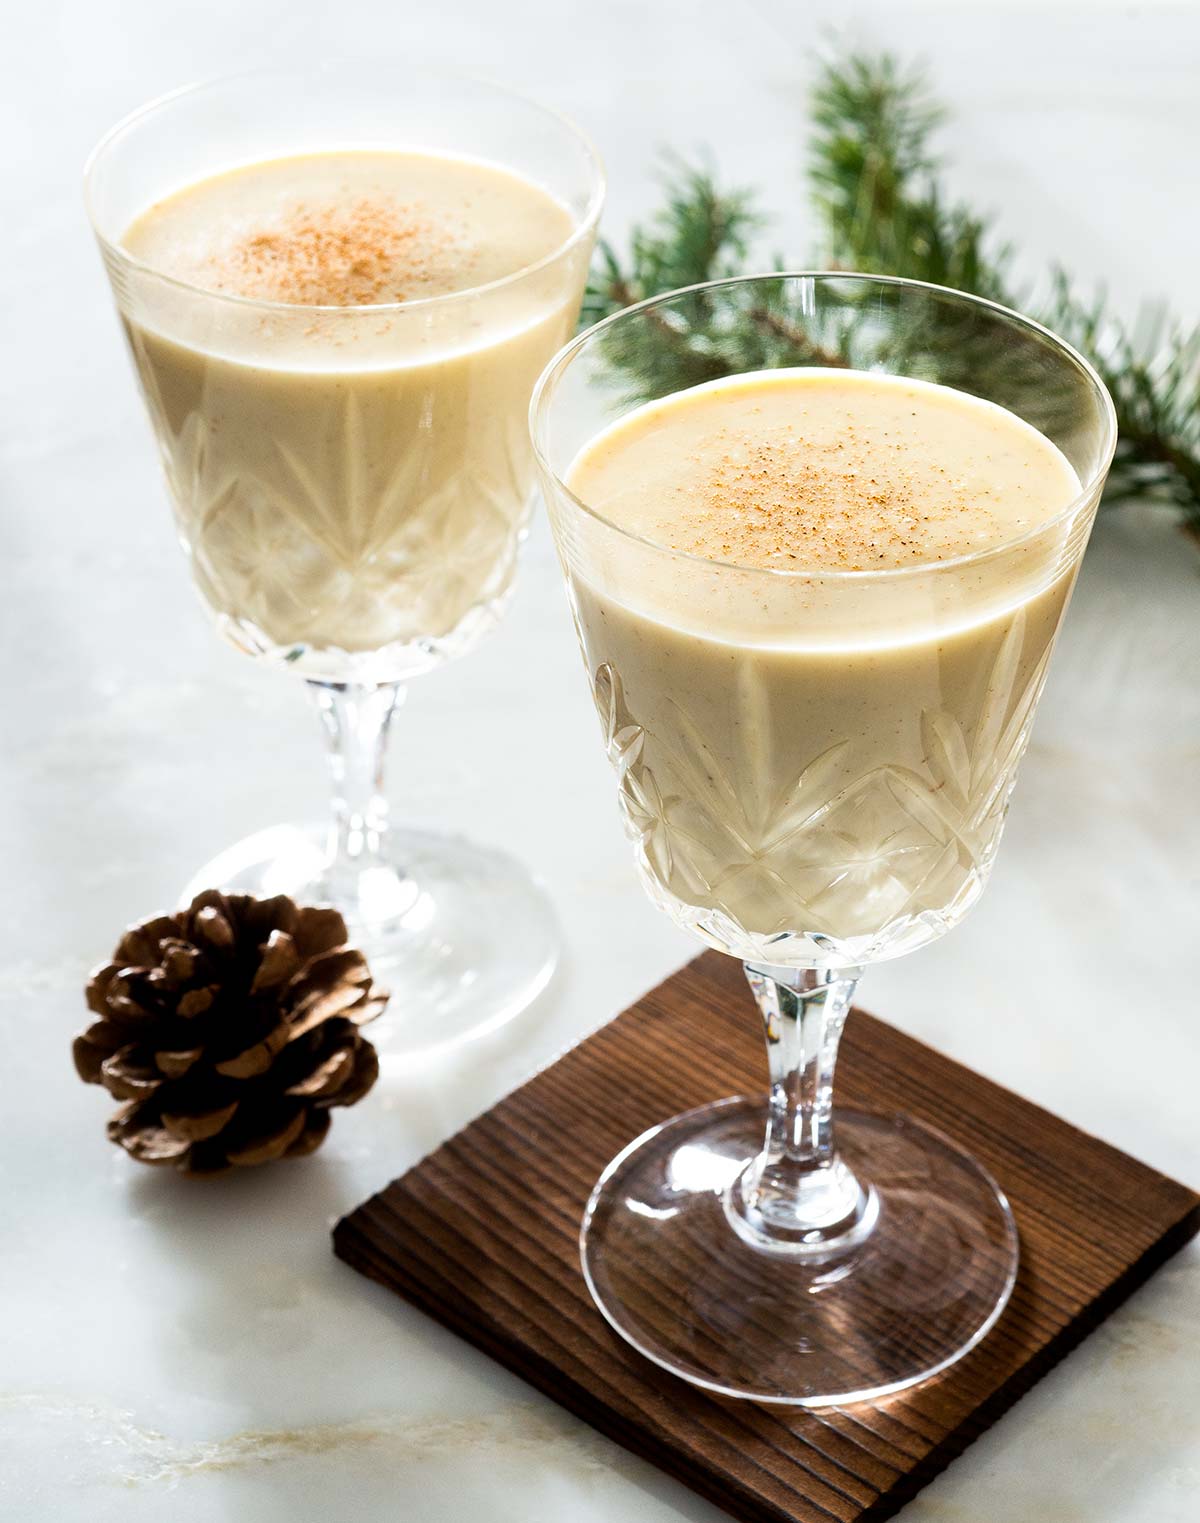 Two elegant classes with spiced eggnog.